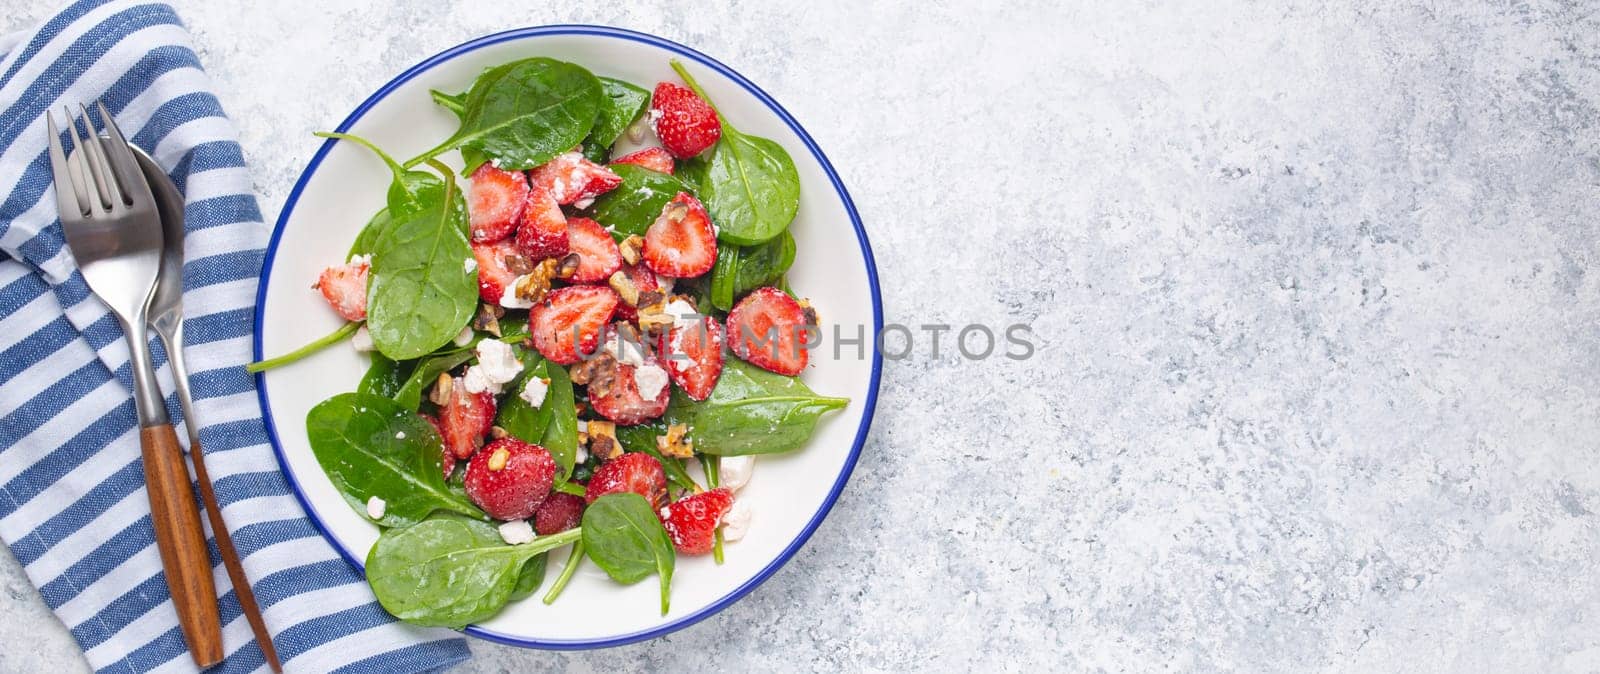 Light Healthy Summer Salad with fresh Strawberries, Spinach, Cream Cheese and Walnuts on White Ceramic Plate, white rustic stone Background From Above, Space For Text.